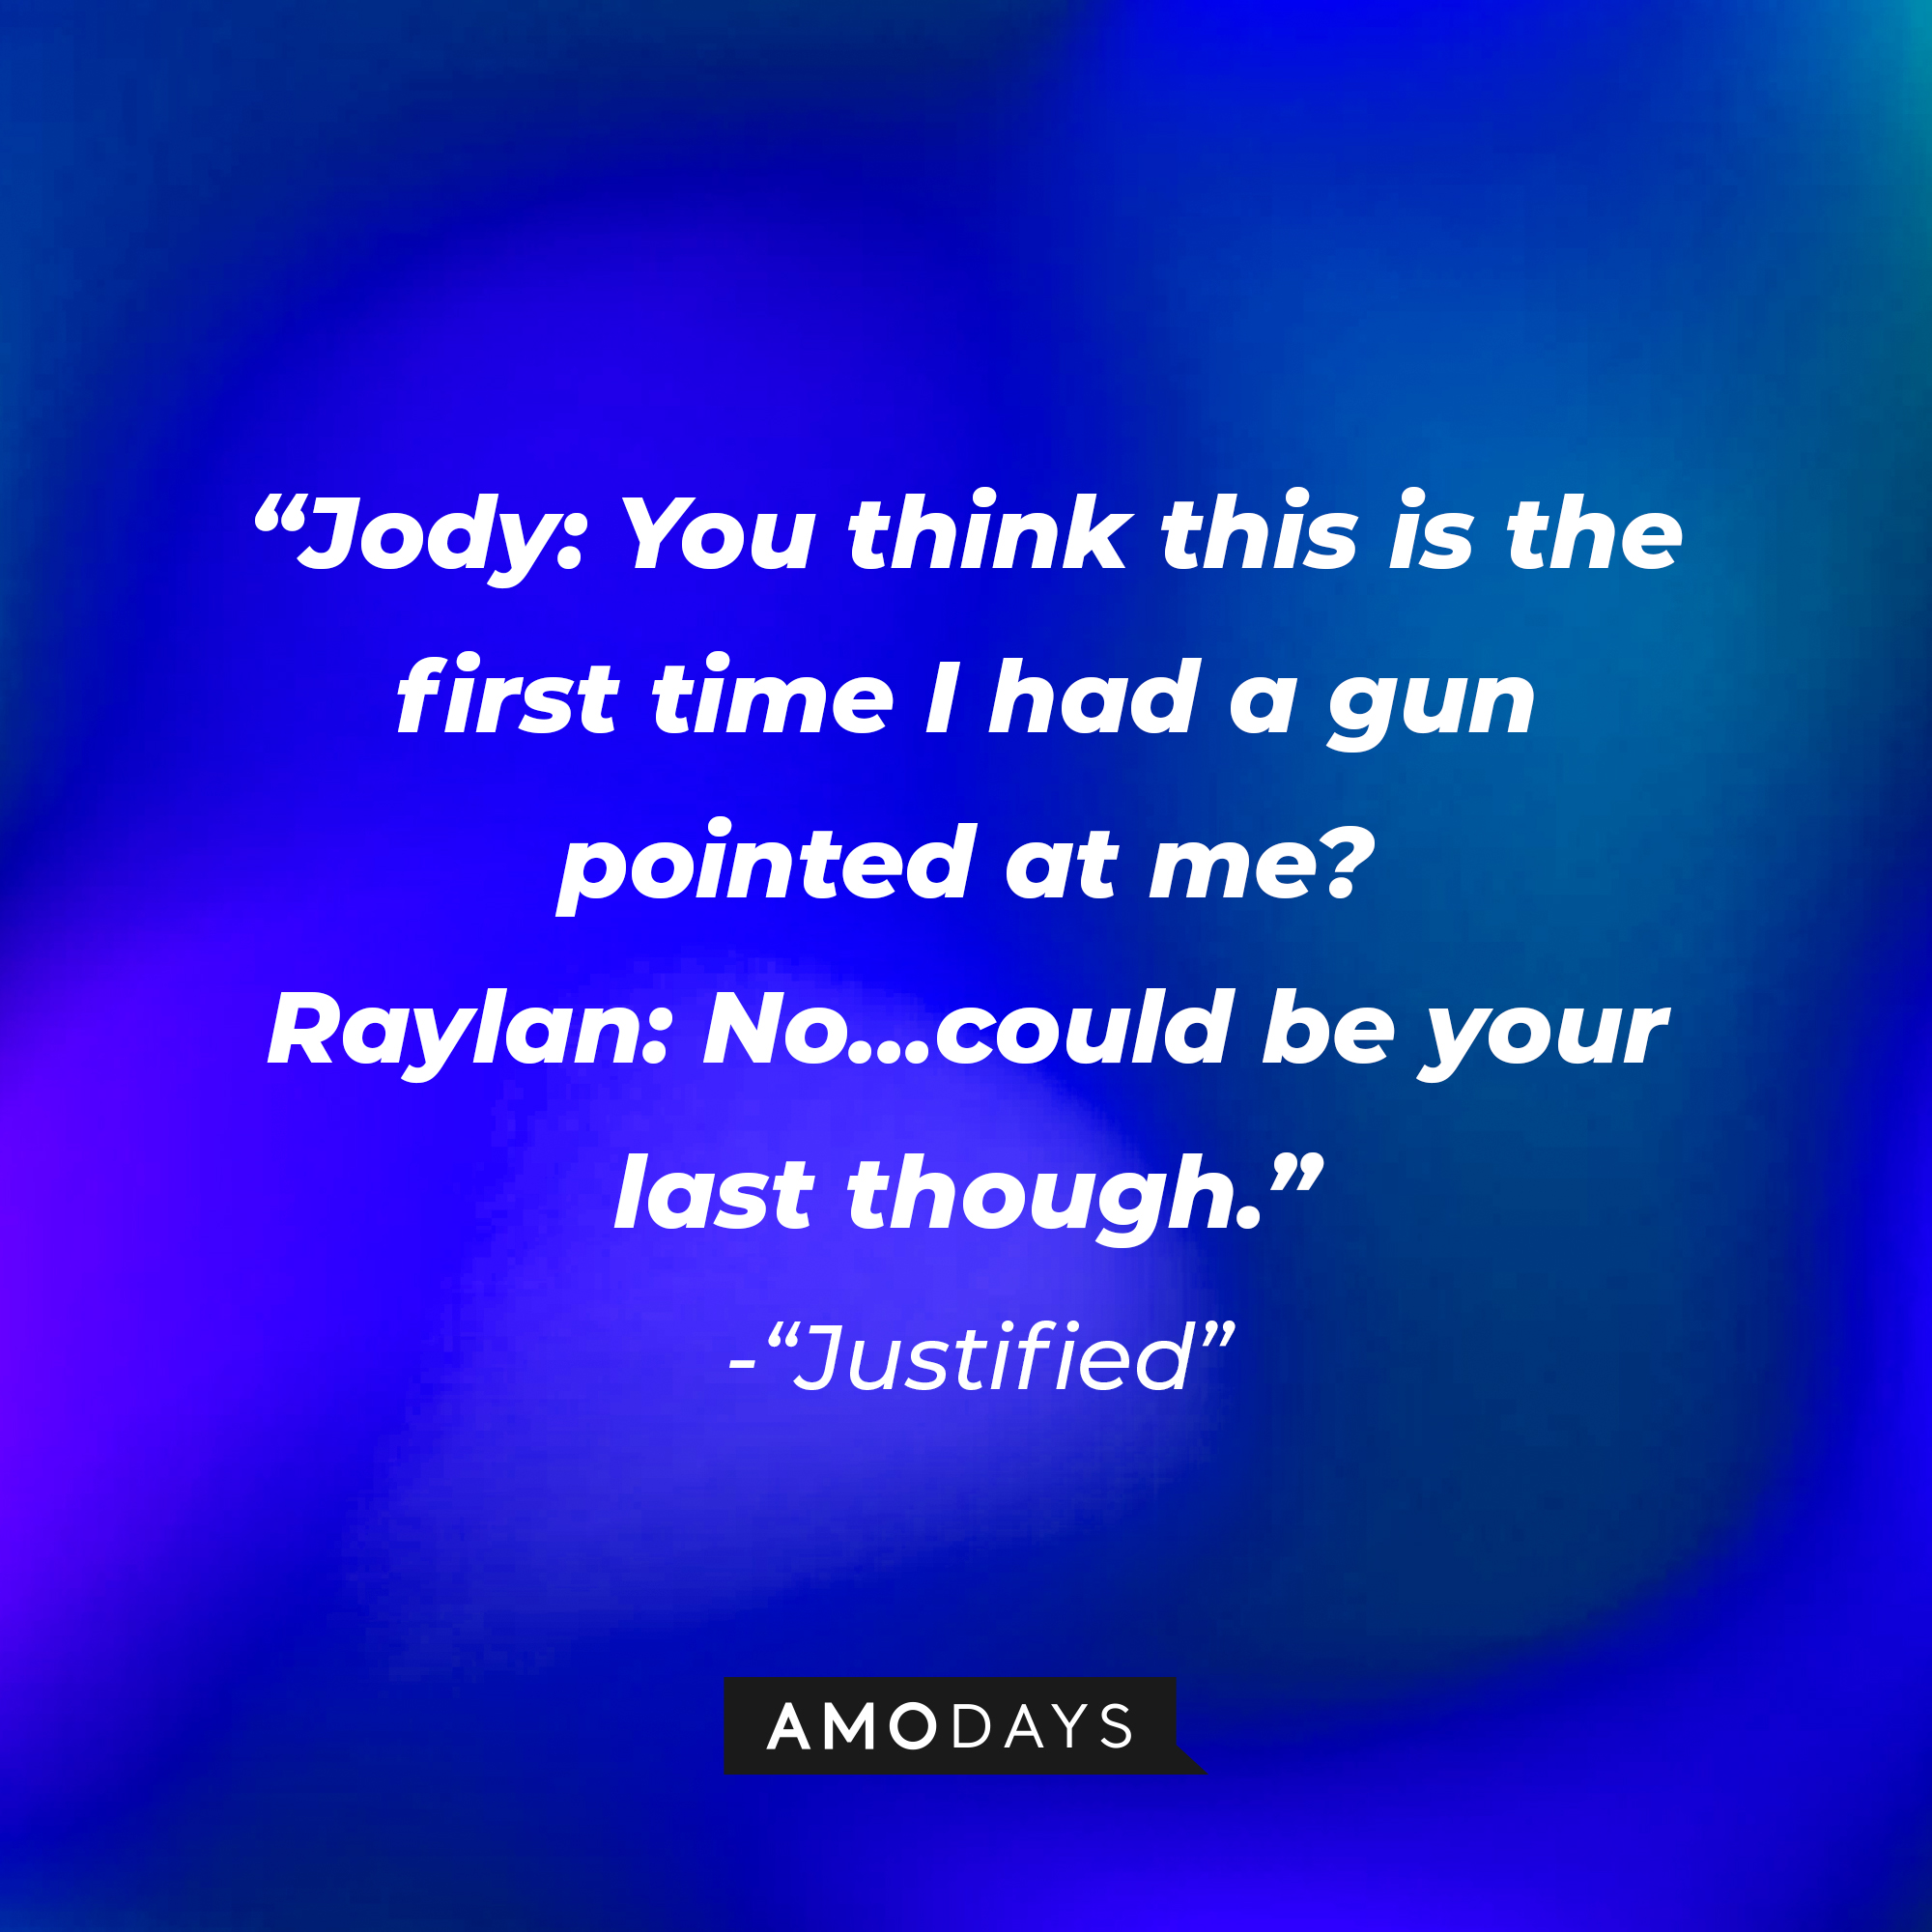 Quote from “Justified”: “Jody: You think this is the first time I had a gun pointed at me? Raylan: No...could be your last though.” | Source: AmoDays